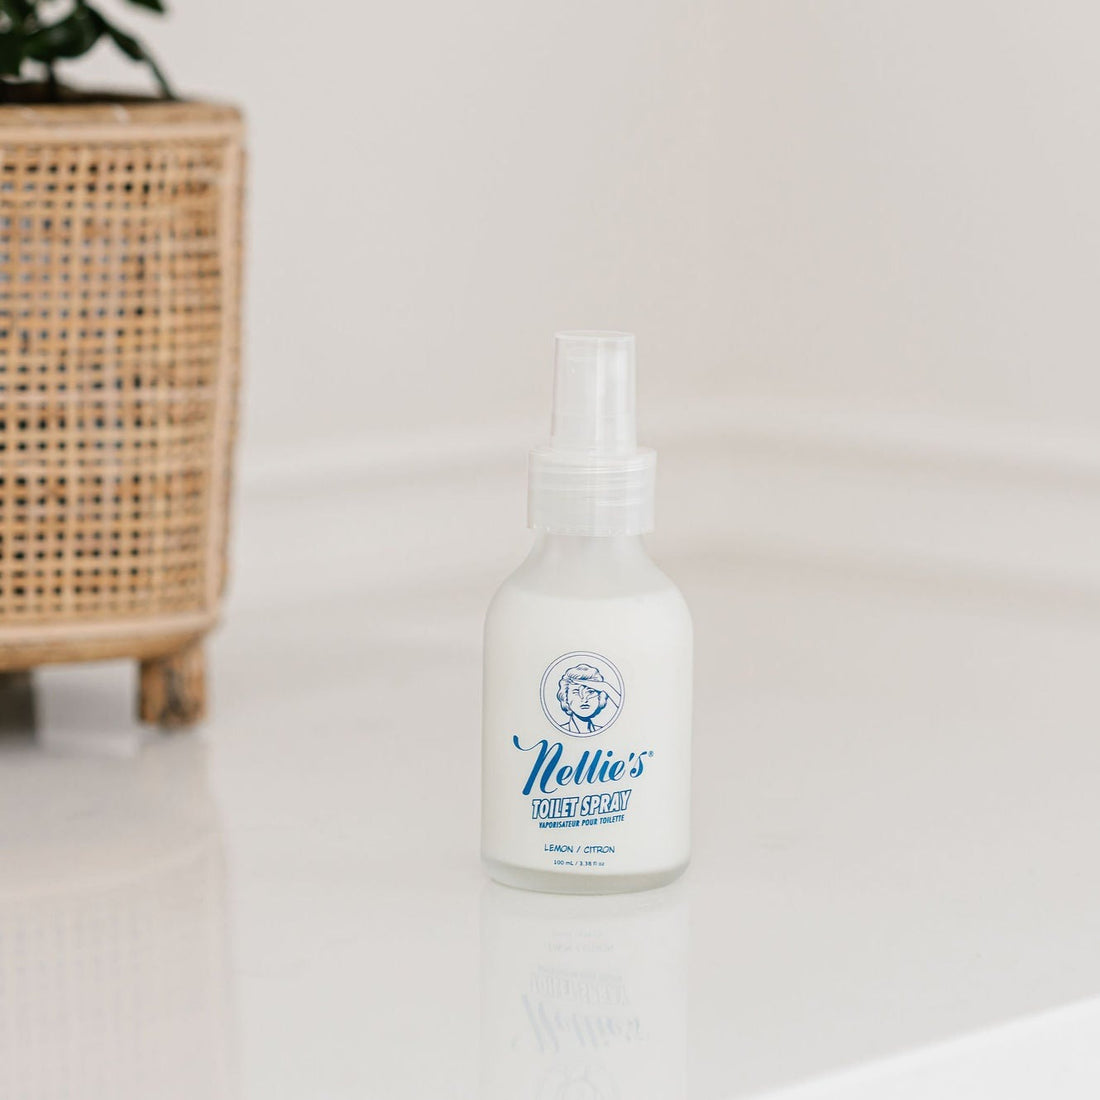 Eco-friendly Toilet Bowl spray with a refreshing lemon scent